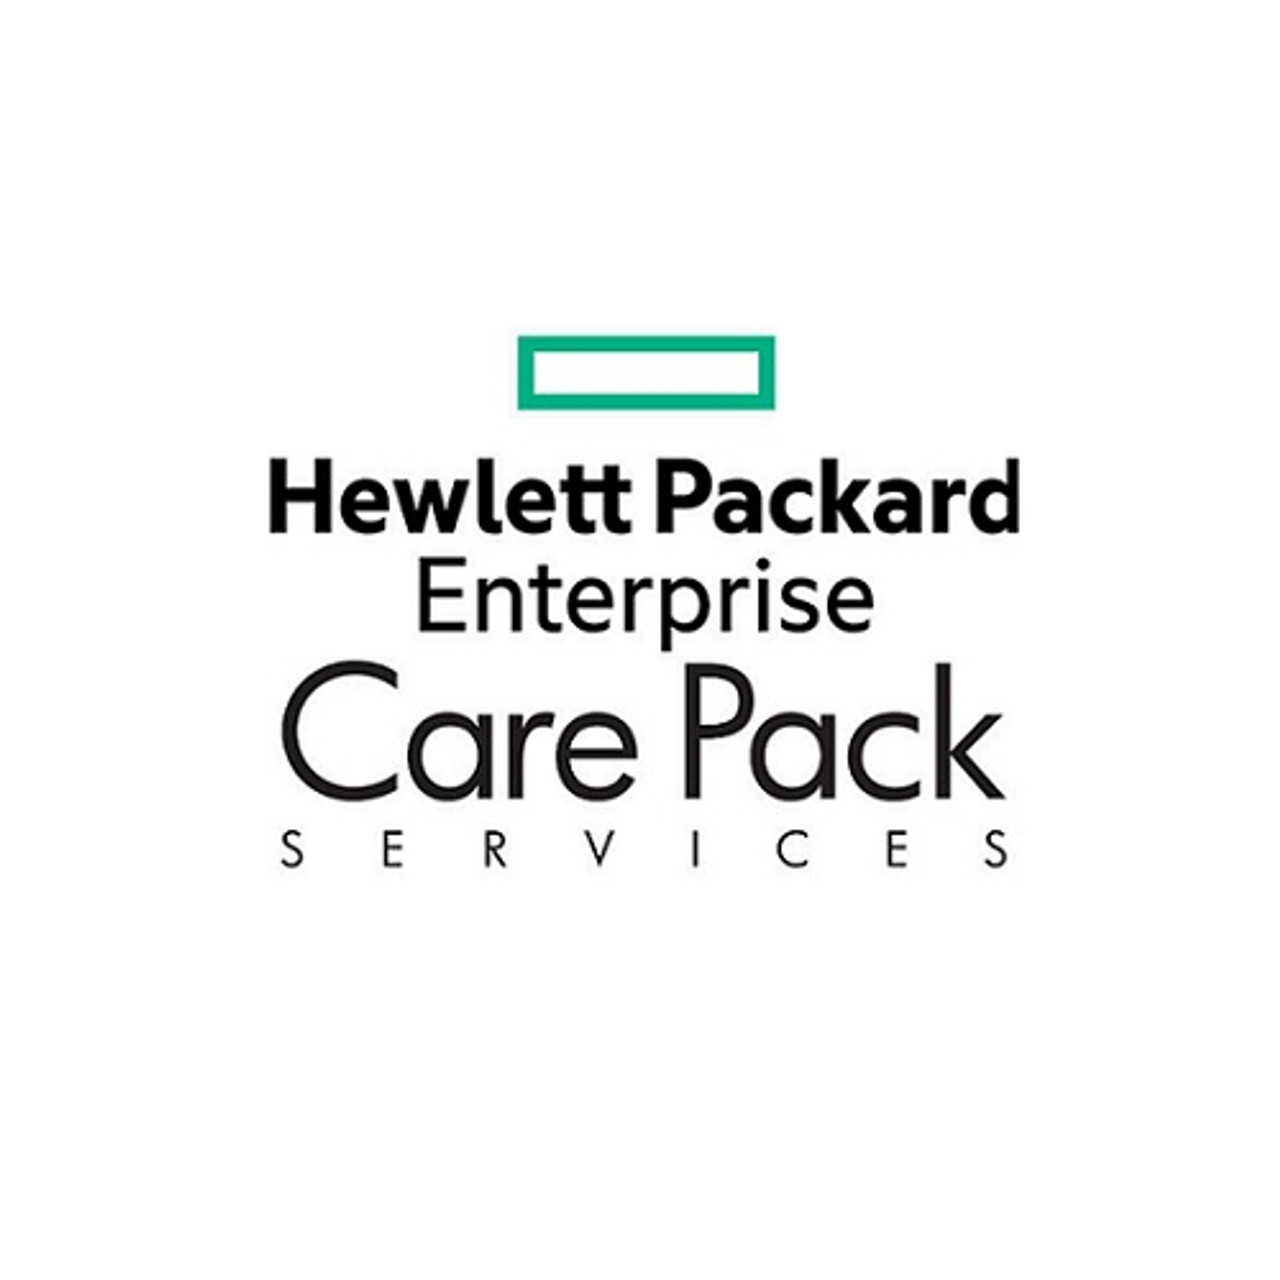 HPE 5 Years Proactive Care 24x7  wCDMR  ML110 Gen9 Service